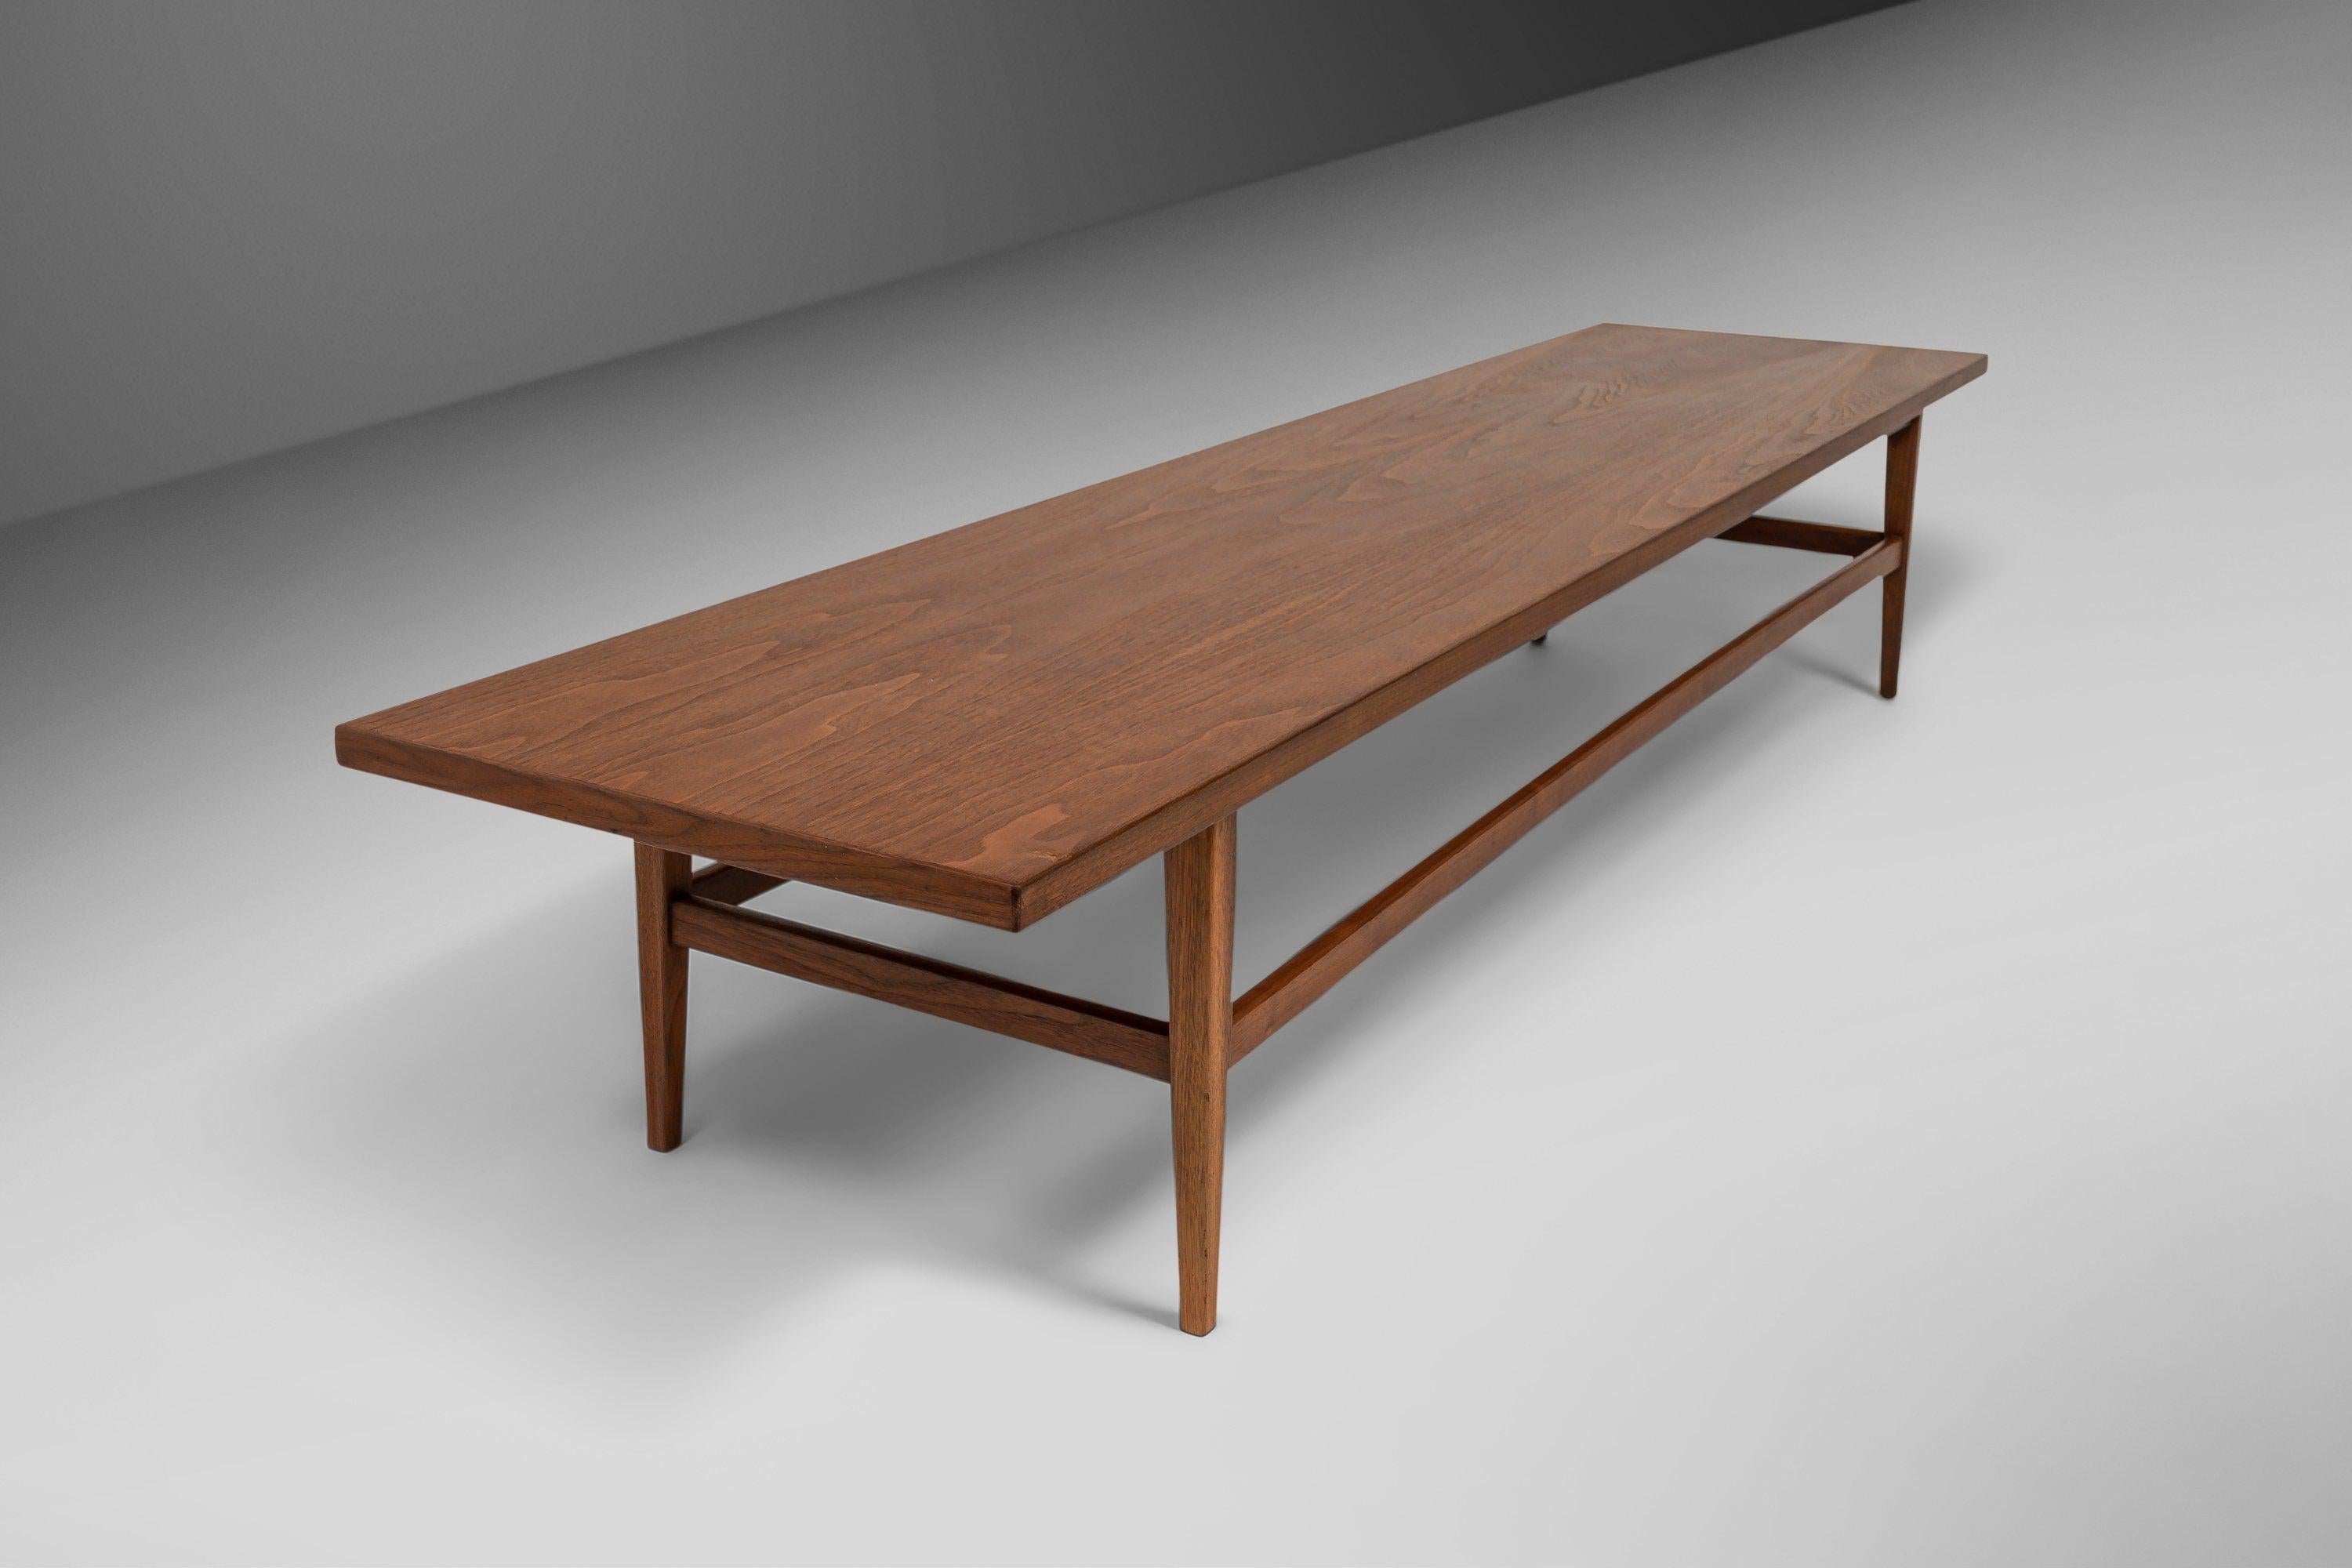 Mid-20th Century Extra Long Mid-Century Modern Coffee Table / Bench in Walnut, c. 1960's For Sale